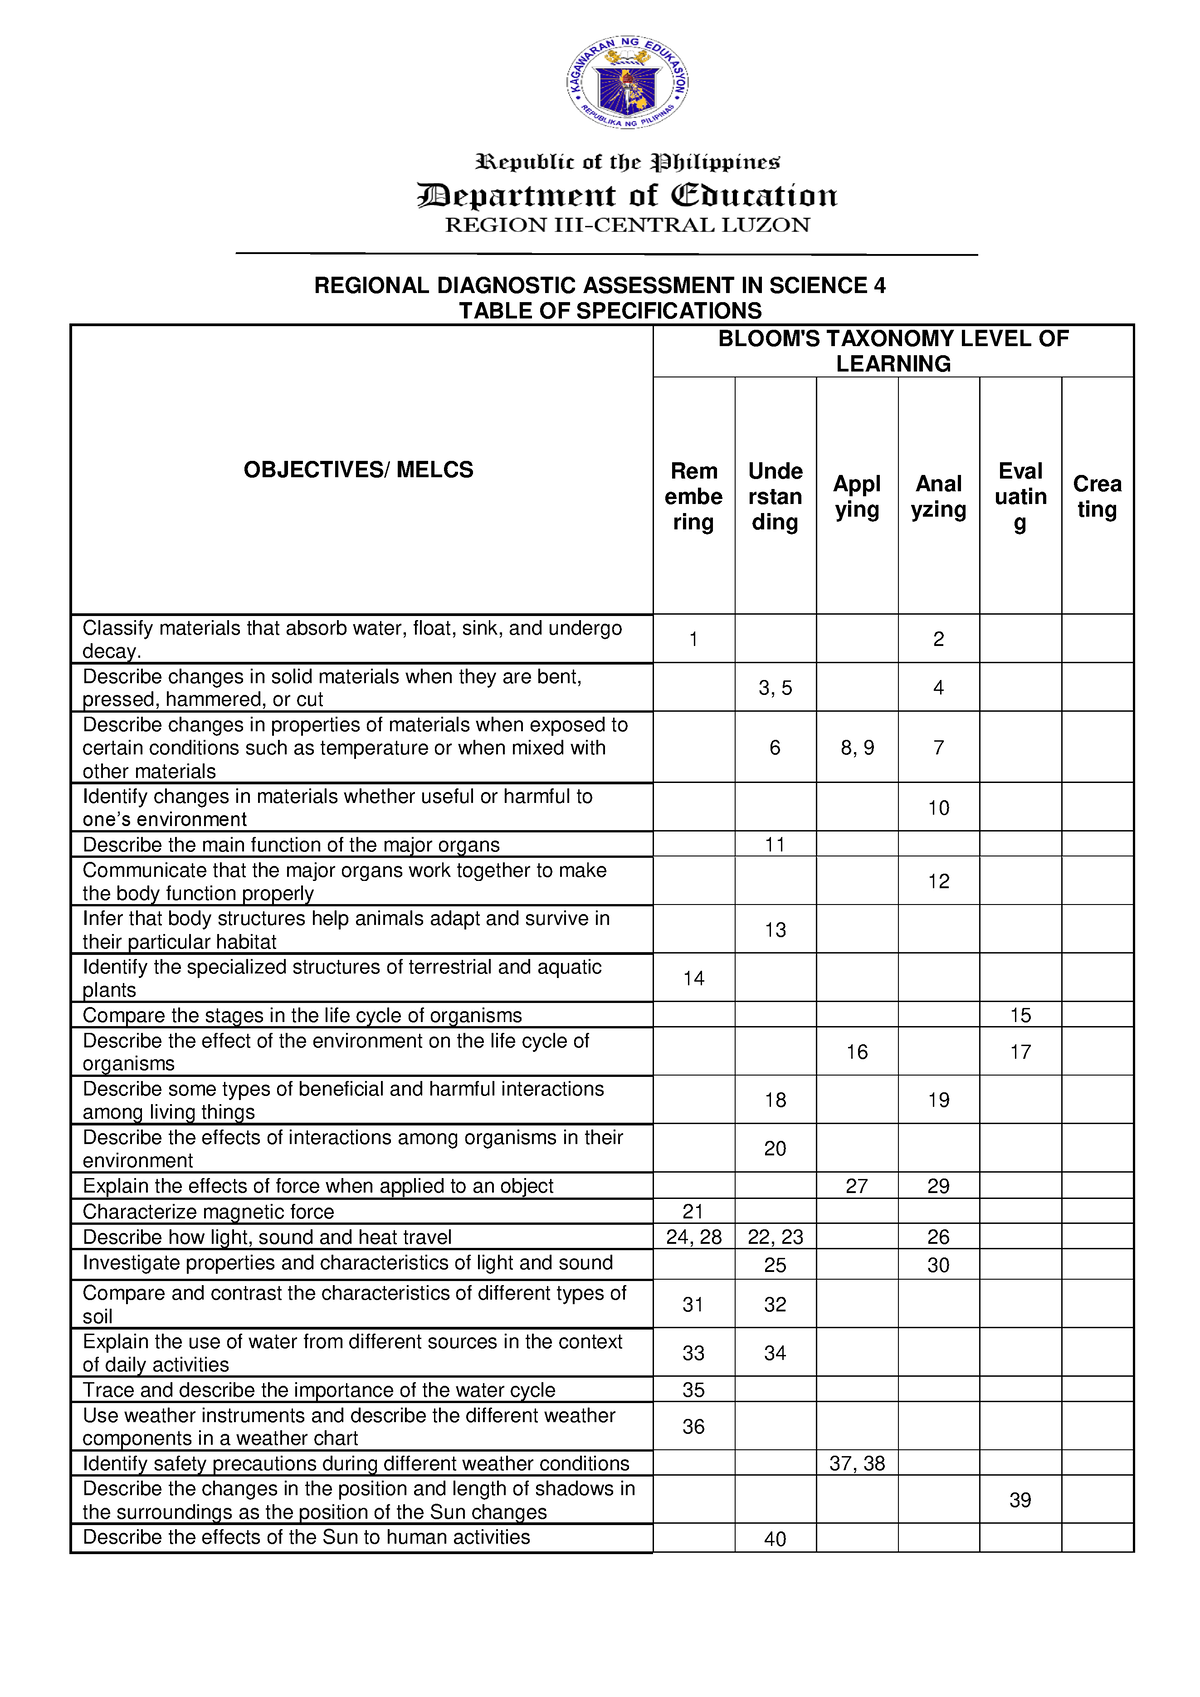 Science 4 Table of Specifications - REGIONAL DIAGNOSTIC ASSESSMENT IN ...